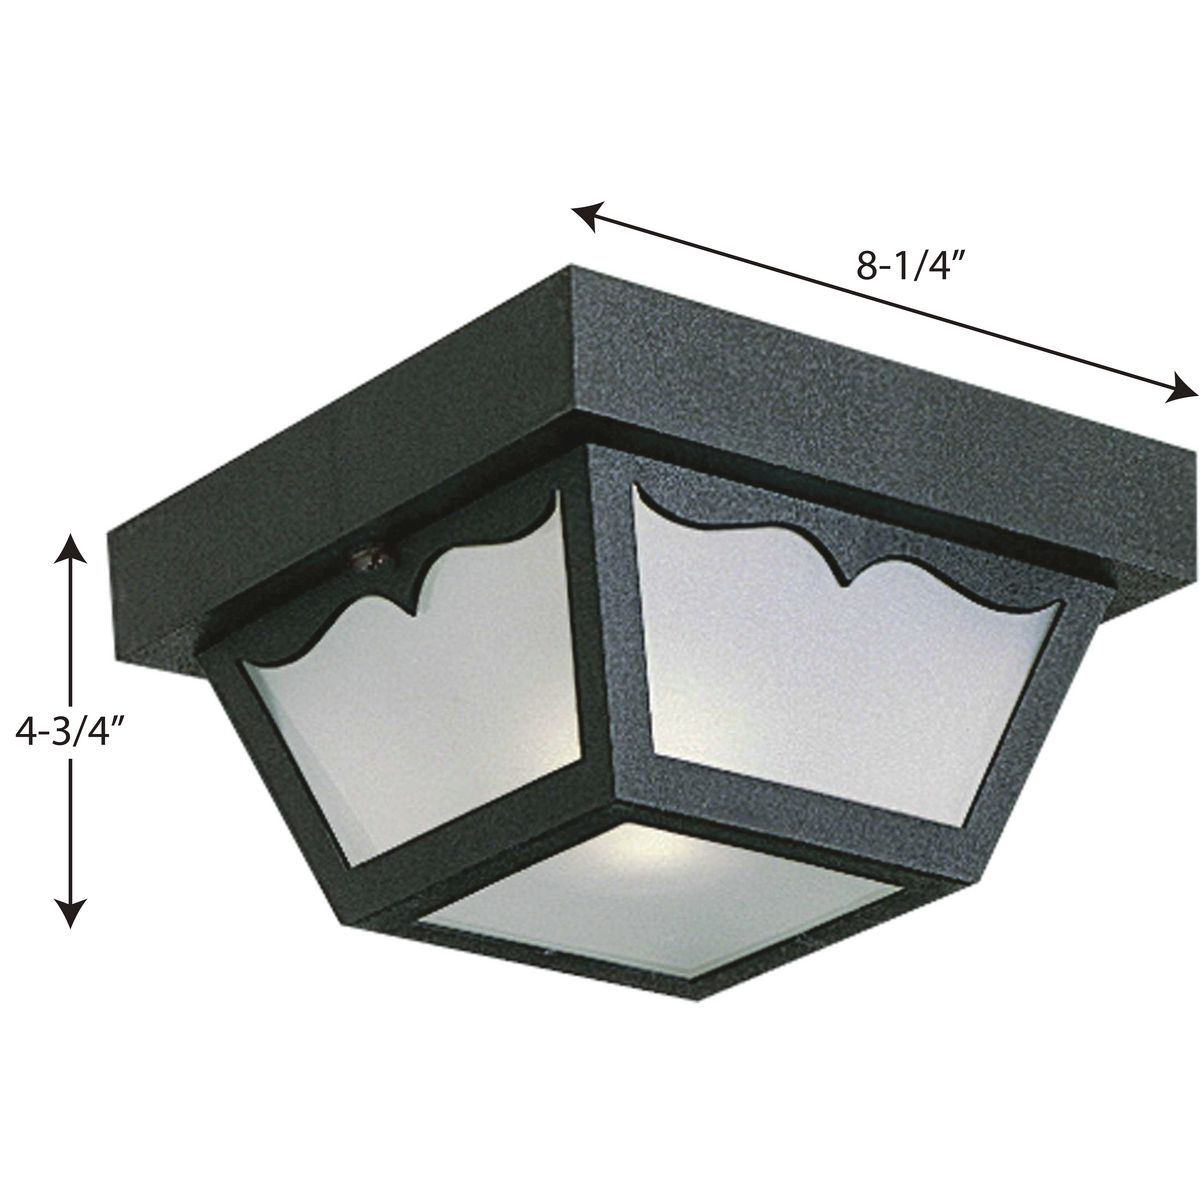 One-Light 8-1/4" Flush Mount for Indoor/Outdoor use - image 2 of 2